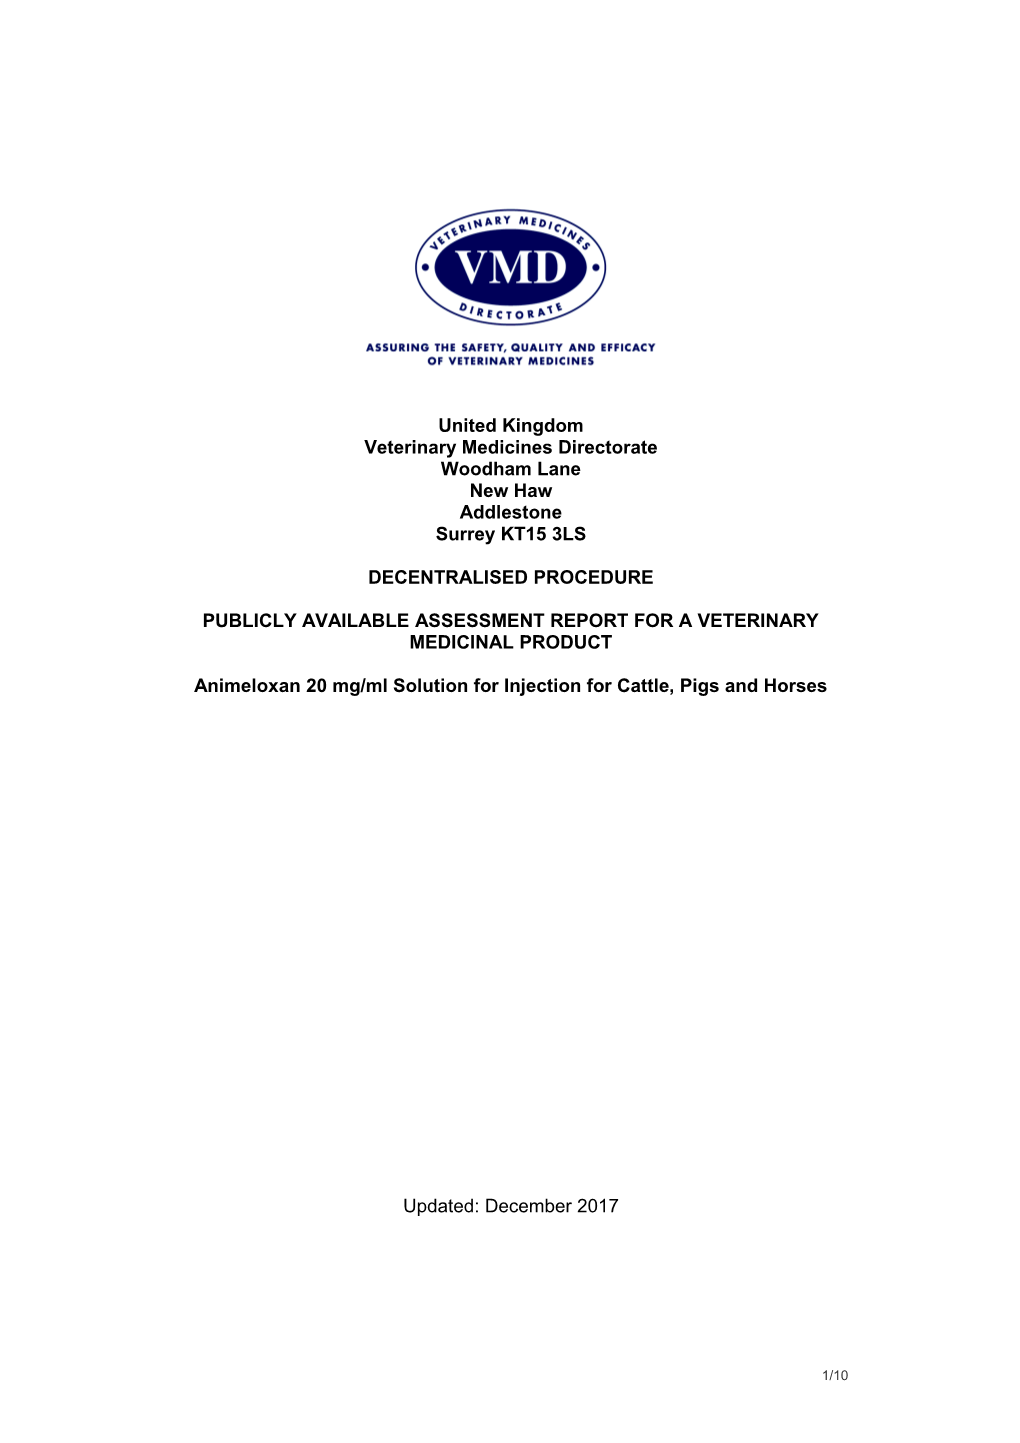 Publicly Available Assessment Report for a Veterinary Medicinal Product s6